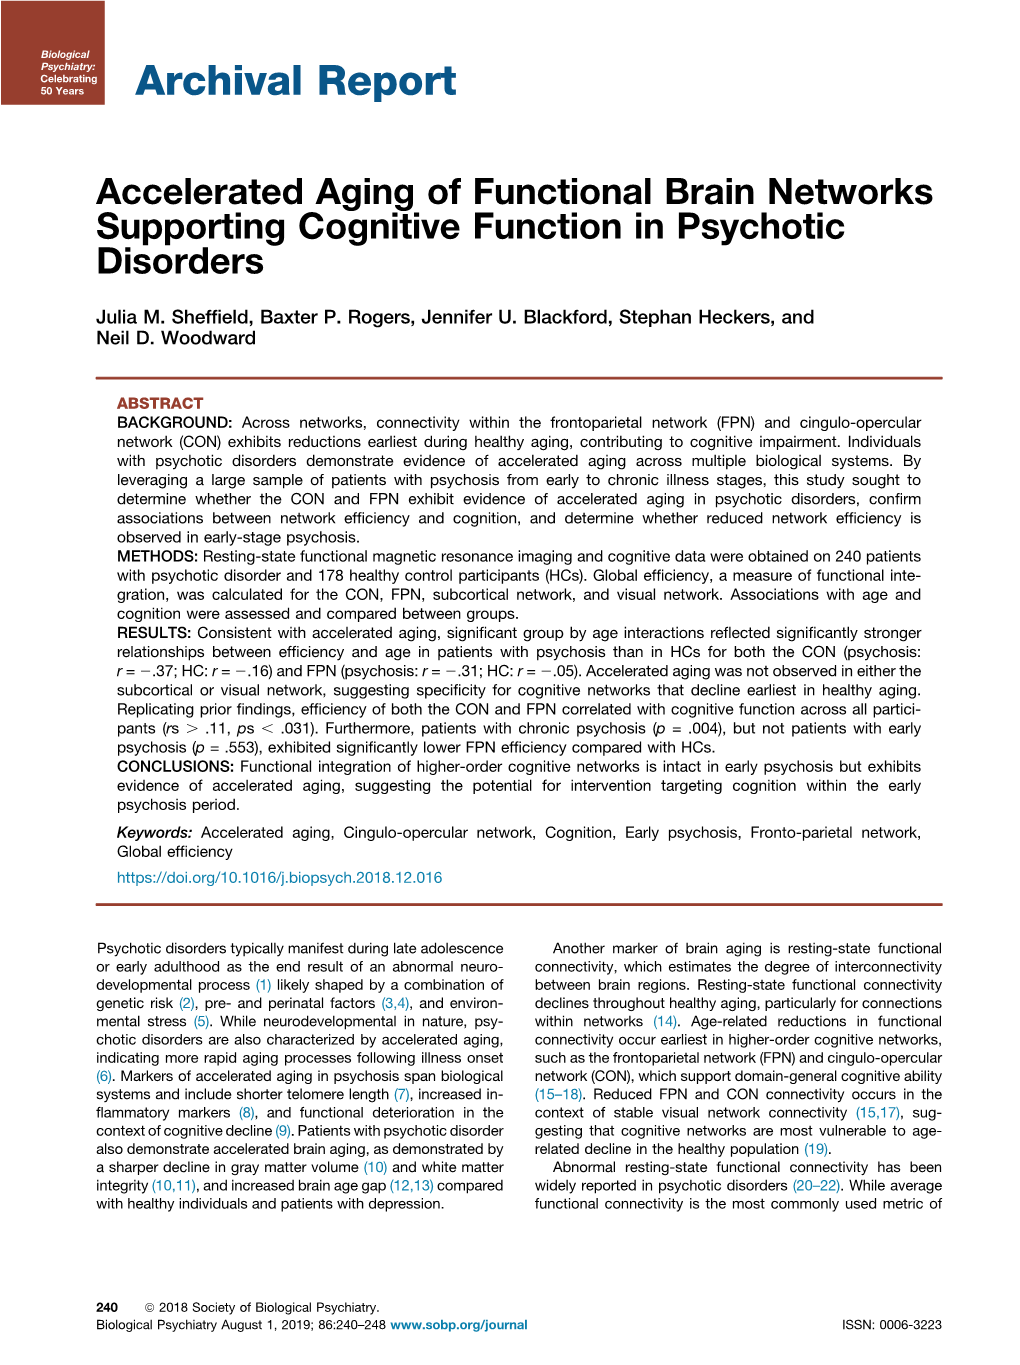 Accelerated Aging of Functional Brain Networks Supporting Cognitive Function in Psychotic Disorders